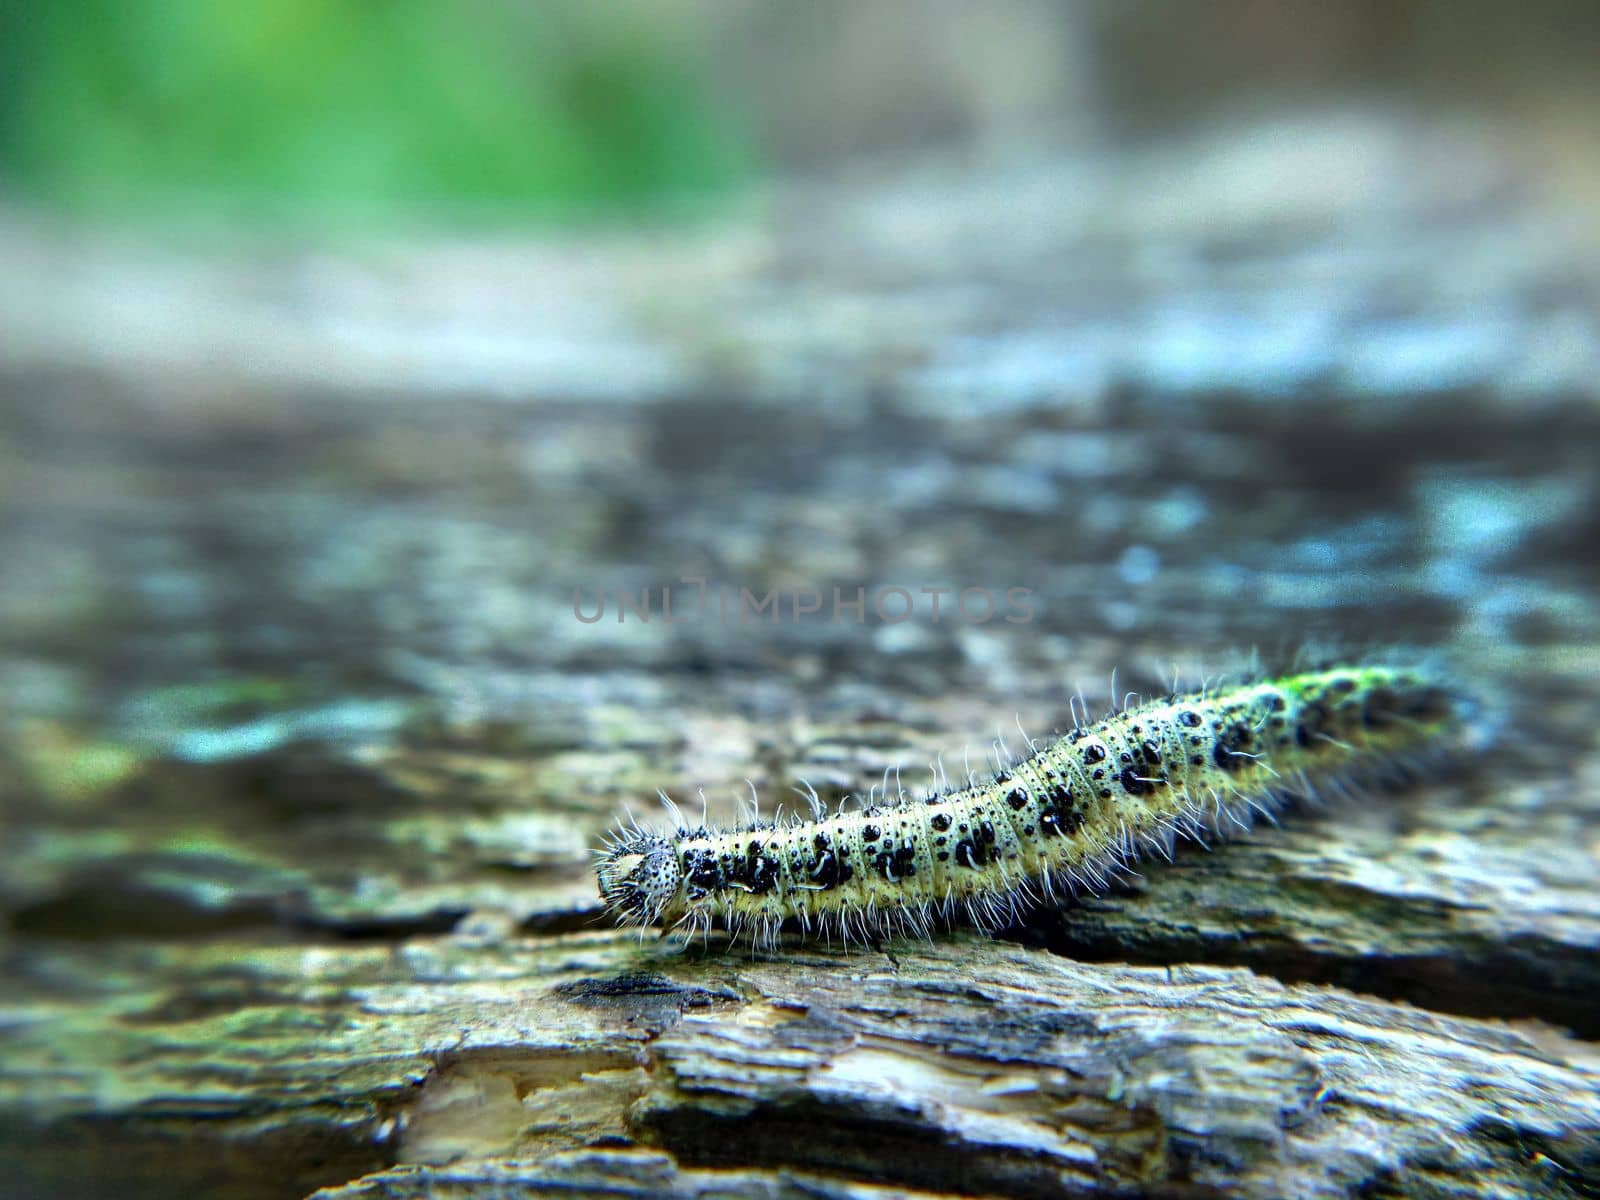 Spotted yellow-green caterpillar on a wooden surface close-up.Macrophotography.Texture or background.Selective fowl.